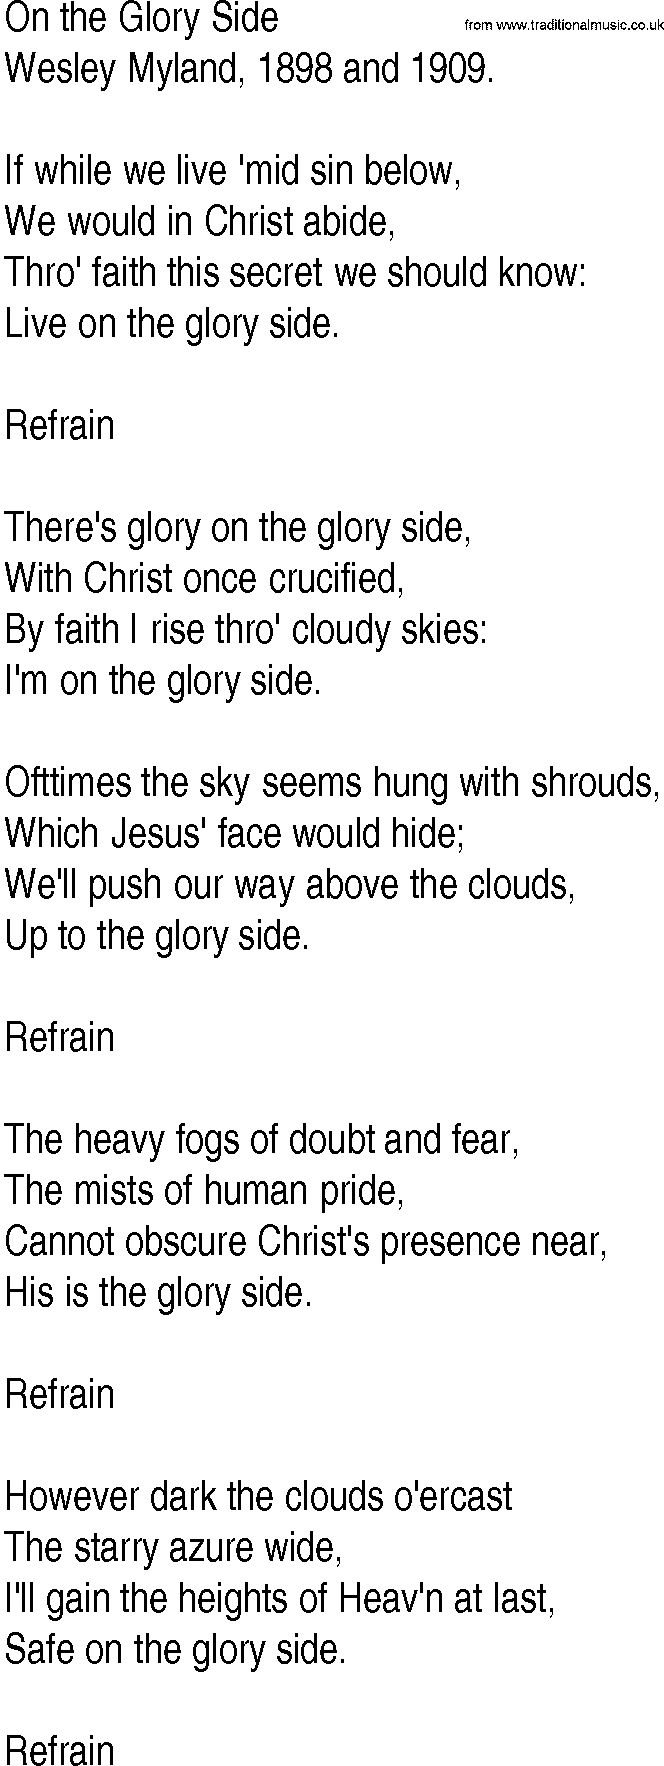 Hymn and Gospel Song: On the Glory Side by Wesley Myland  and lyrics